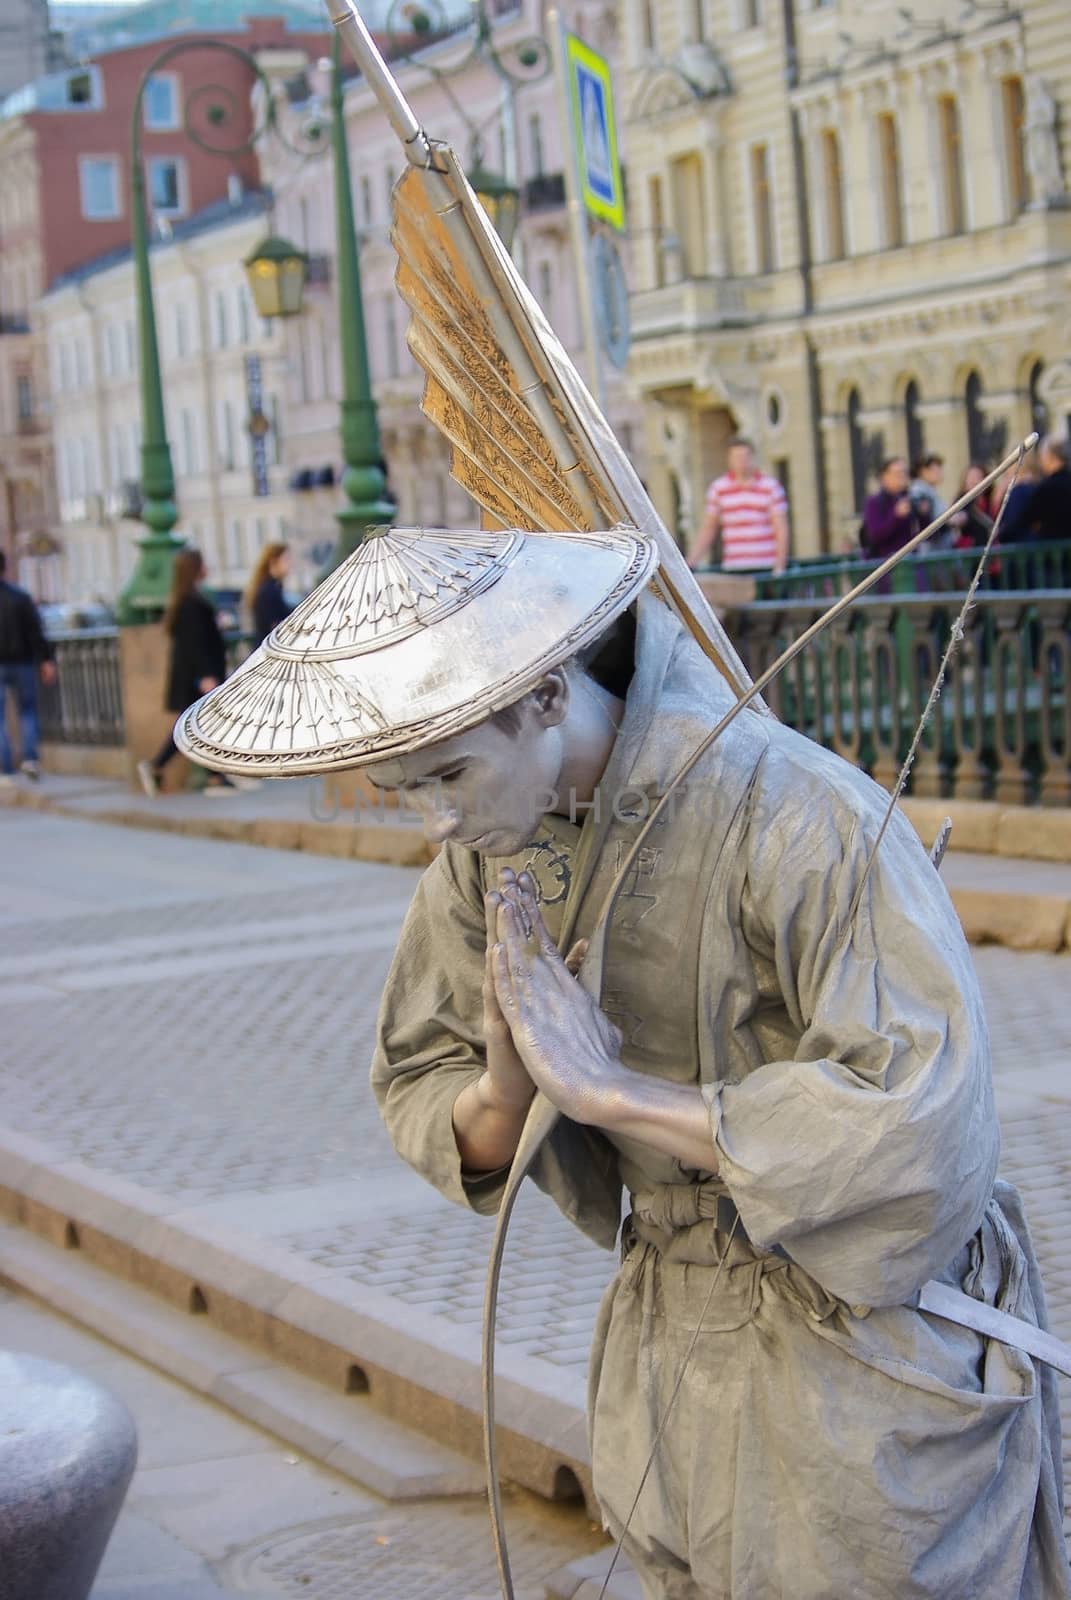 ST PETERSBURG, RUSSIA - JANUARY 01, 2016: a performer - Silver painted artists on a city street, living statues by evolutionnow